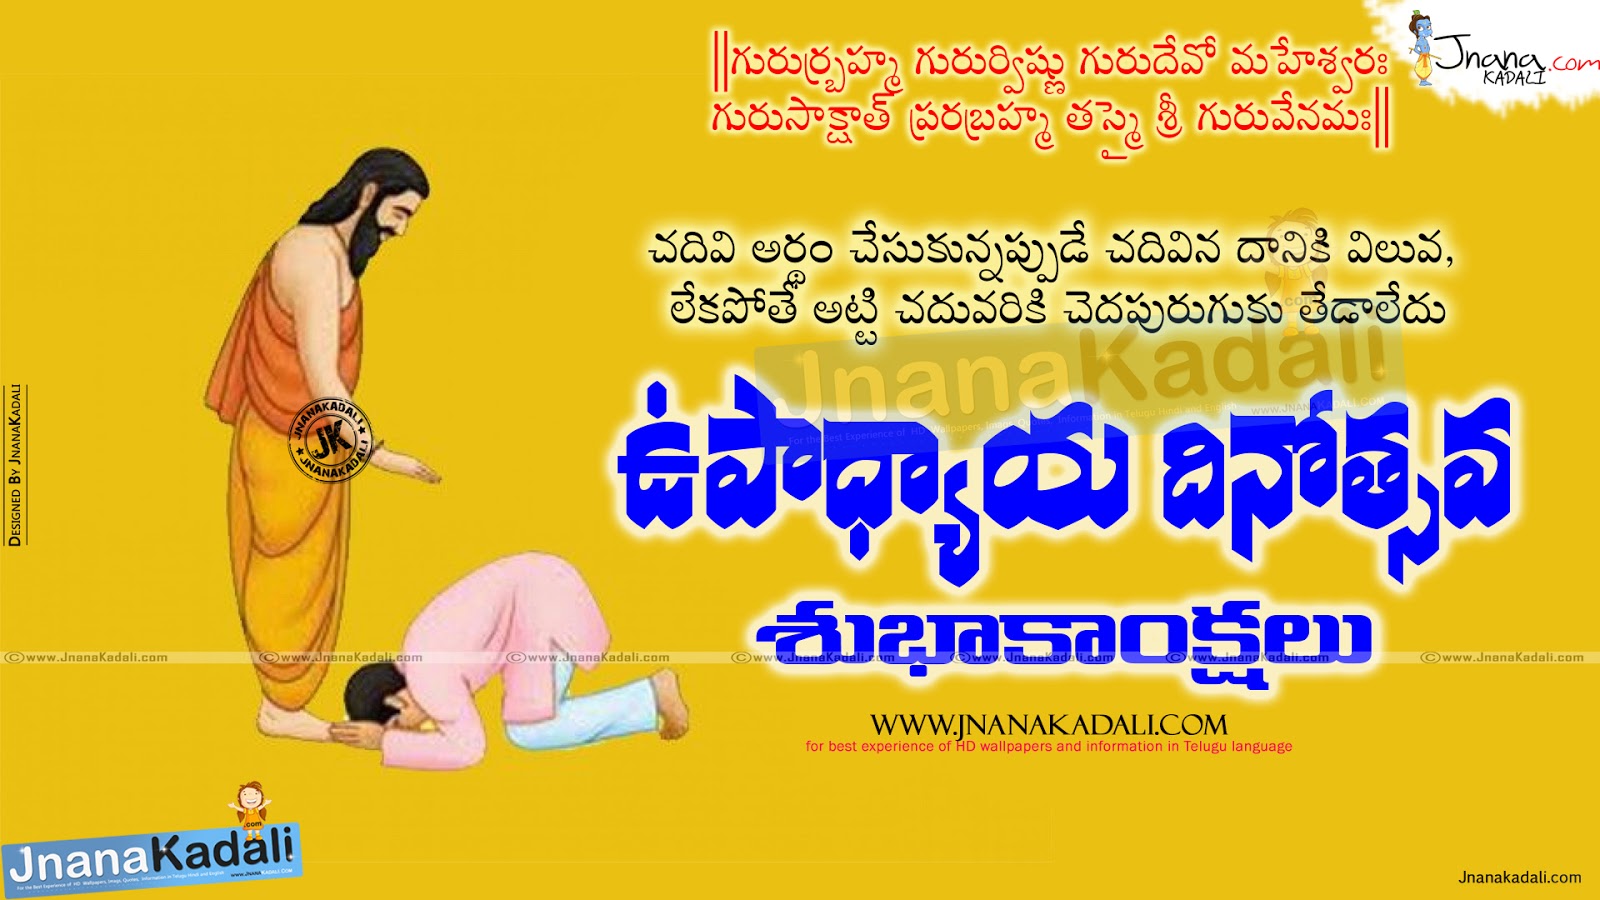 Happy Teachers Day wishes in Telugu with hd wallpapers | JNANA   |Telugu Quotes|English quotes|Hindi quotes|Tamil quotes|Dharmasandehalu|